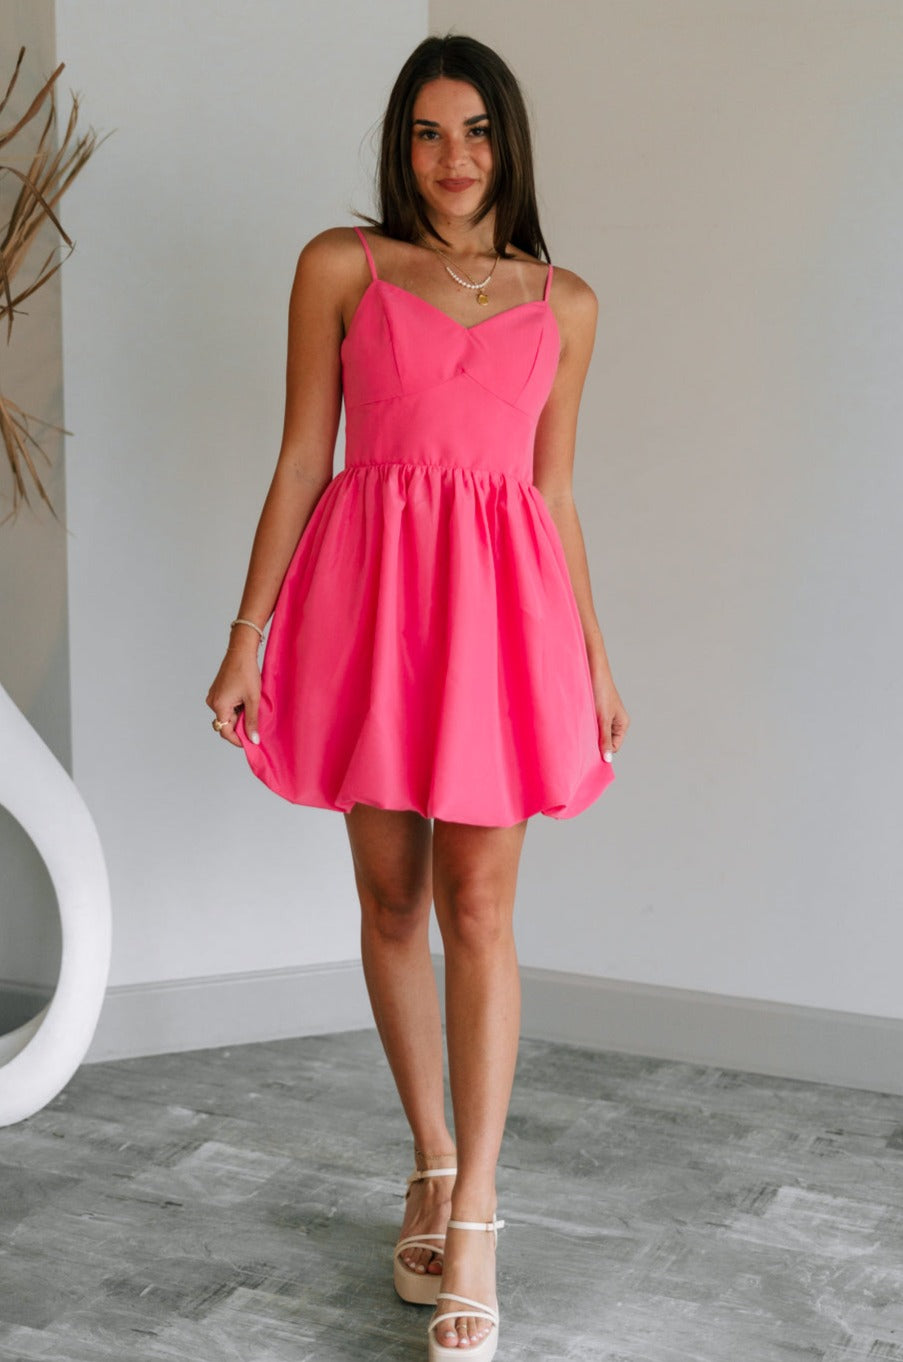 Full body view of female model wearing the Camila Sleeveless Bubble Mini Dress in PInk which features Lightweight Fabric, Mini Length with Bubble Hem, Two Side Slit Pockets, Sweetheart Neckline, Adjustable Straps and Smocked Back